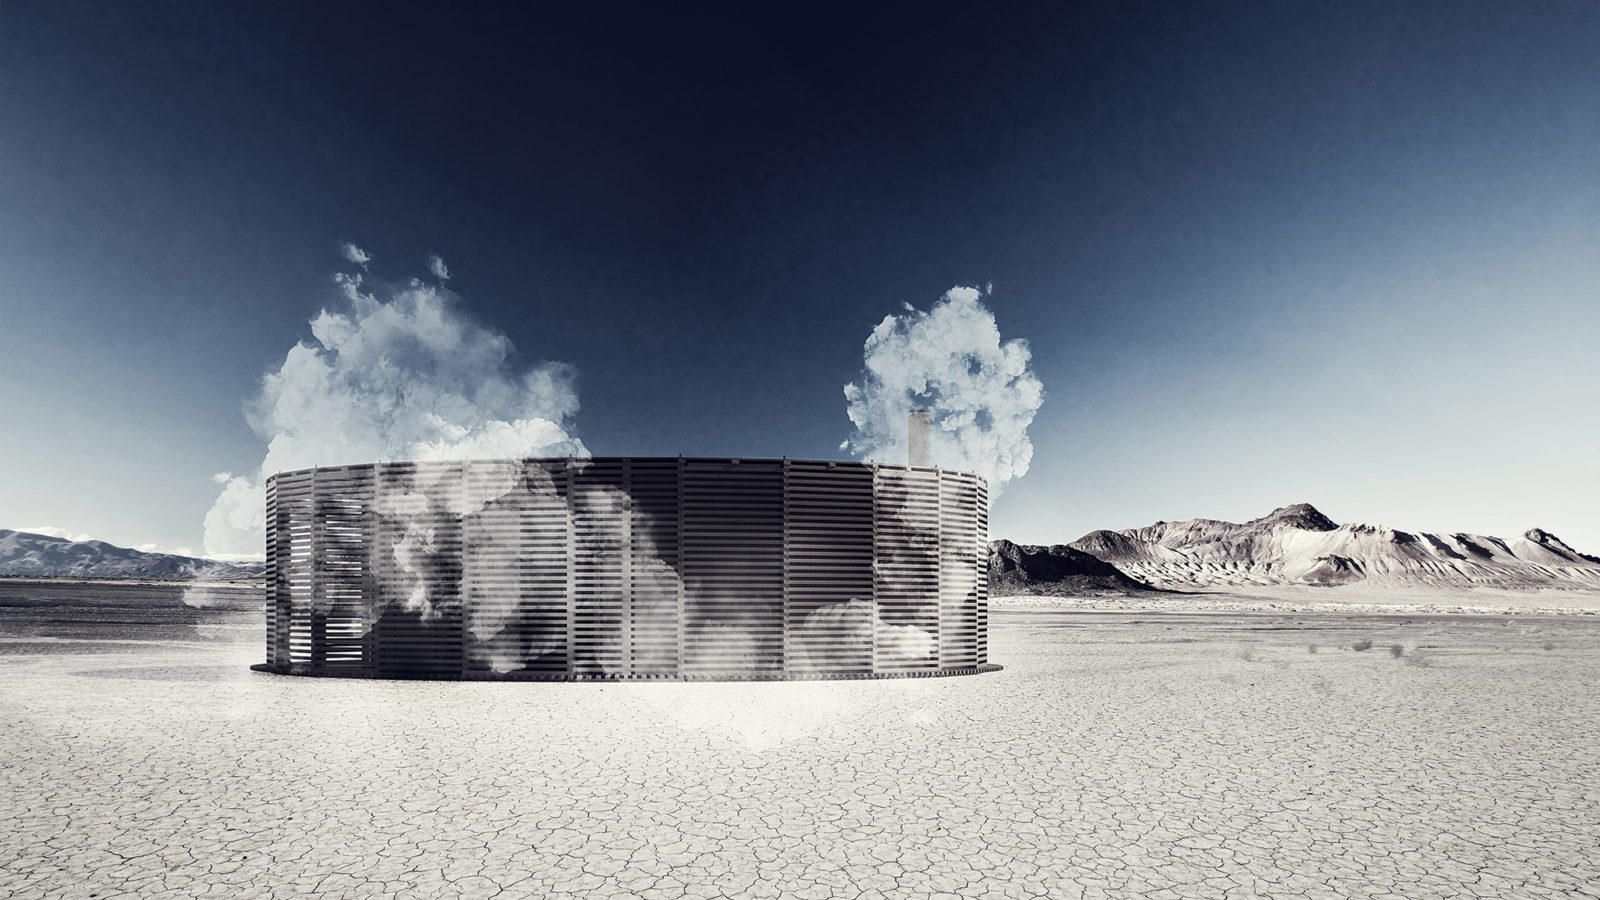 Rendering of a sauna in the desert, as part of Burning Man